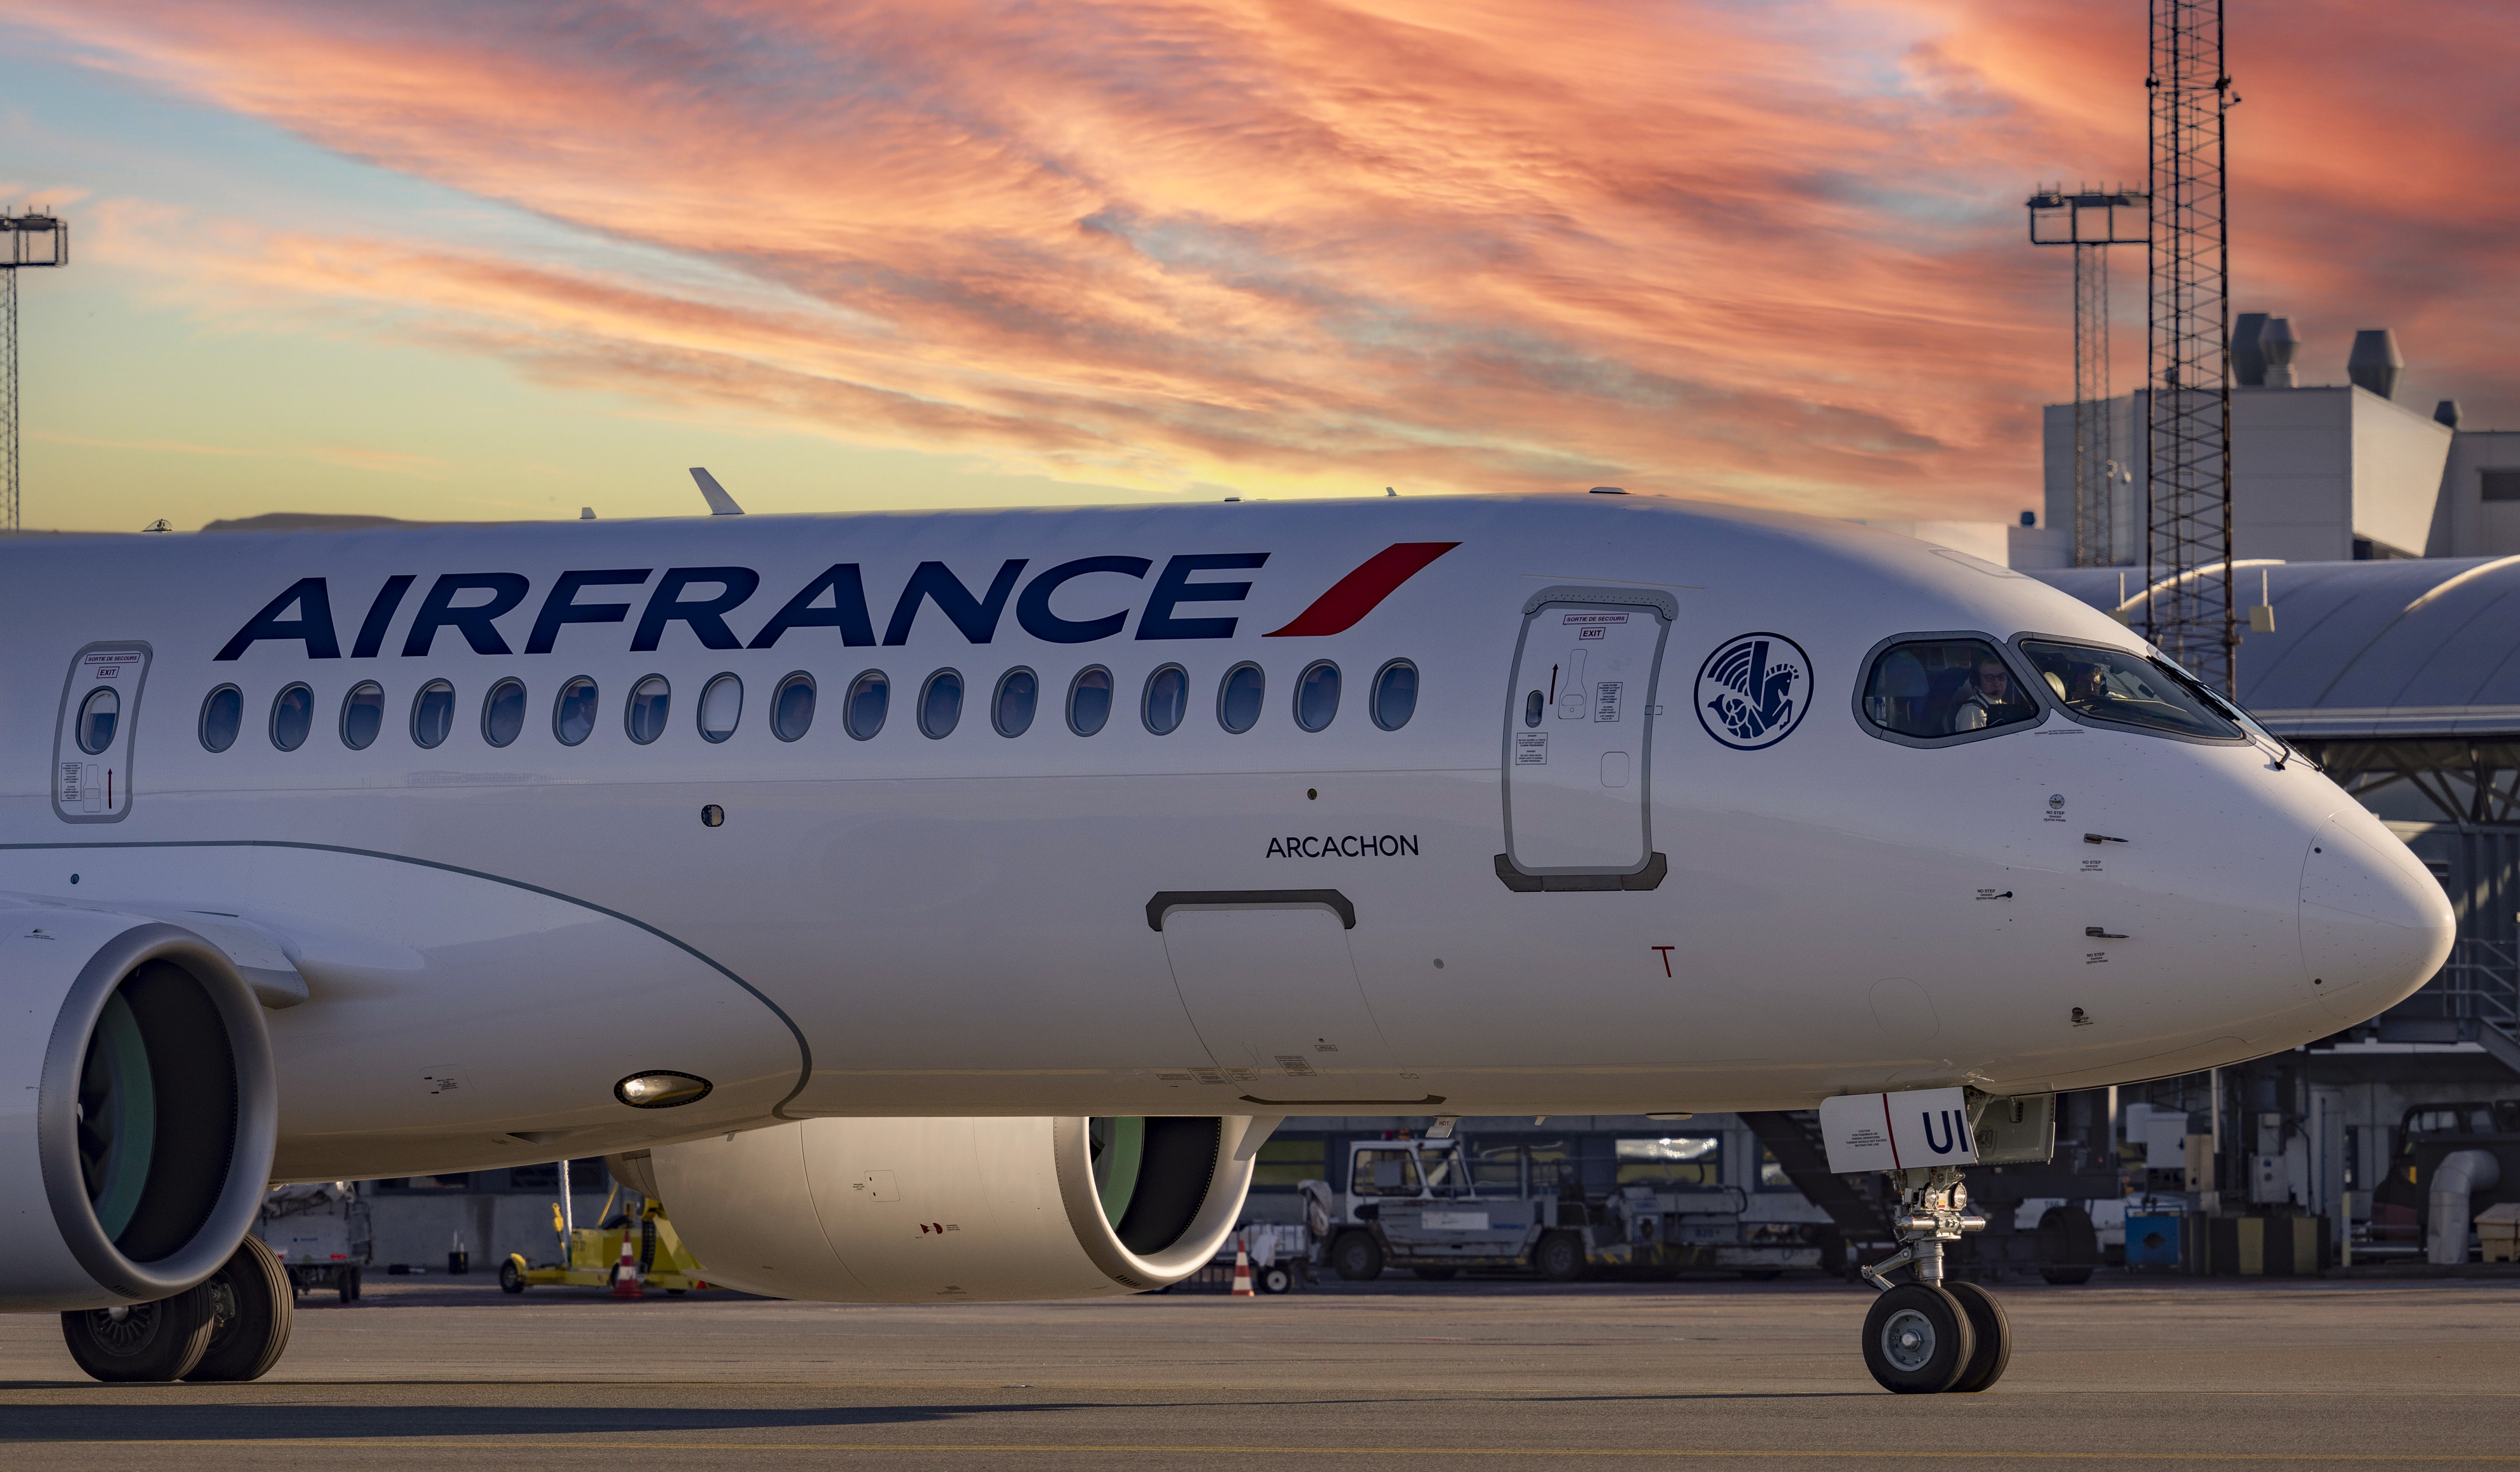  Air France celebrated its 90th anniversary